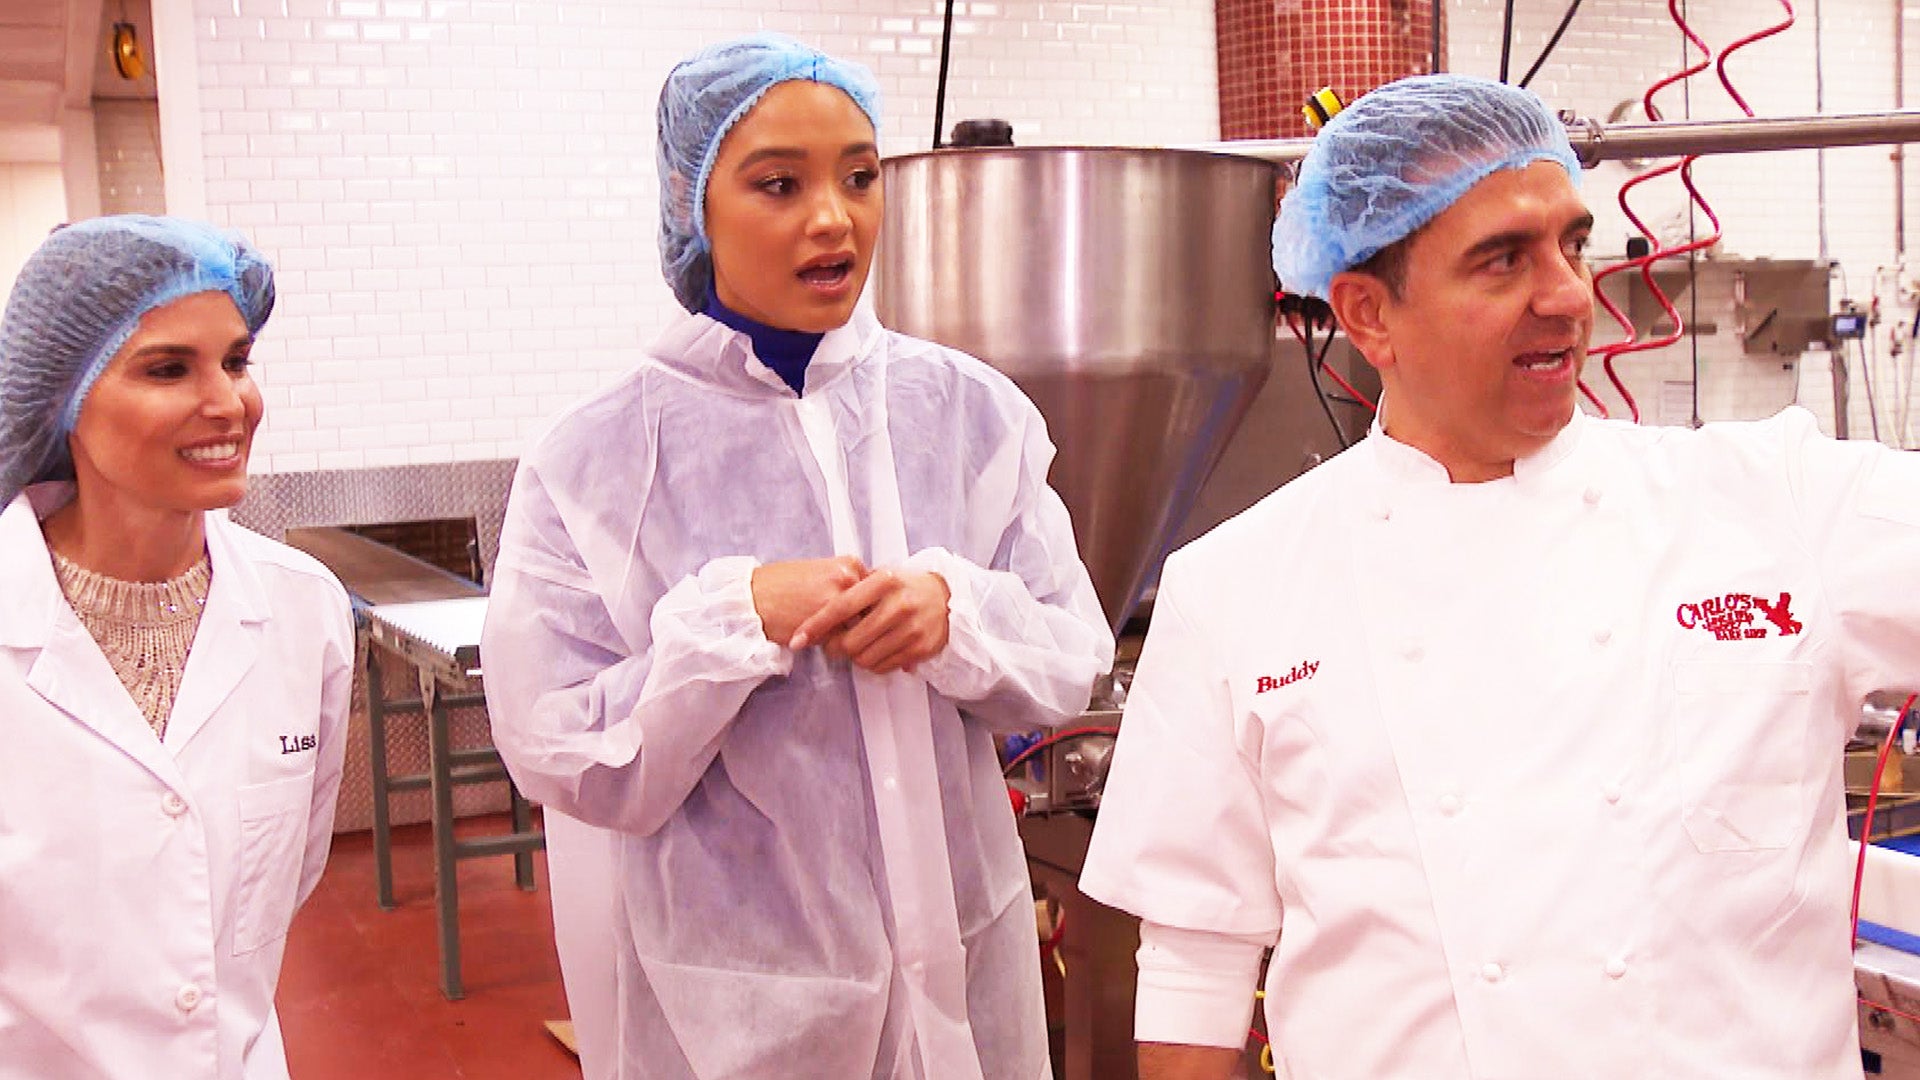 Inside Buddy Valastro’s Factory That Produces 10,000 Cakes a Day! (Exclusive)